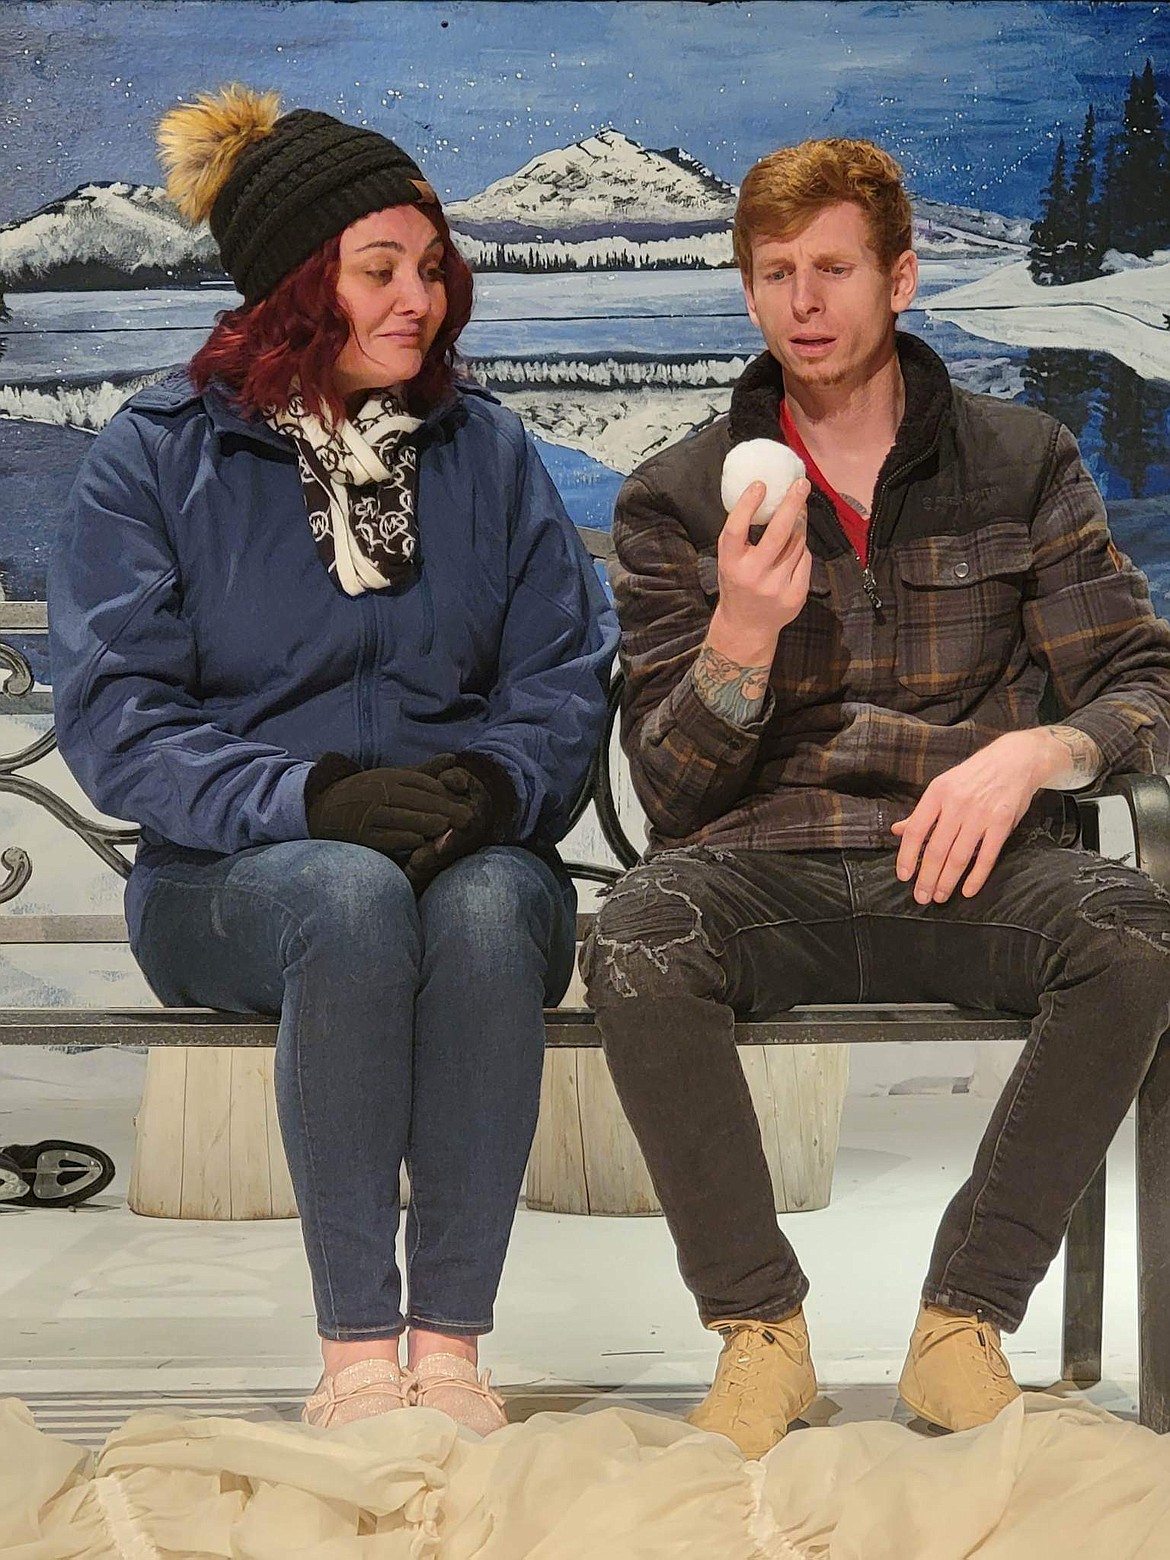 A couple in love (Amy Dana, left, and CW Forrest) discuss the metaphysics of closeness in “Almost, Maine” opening tonight at the Masquers Theater.